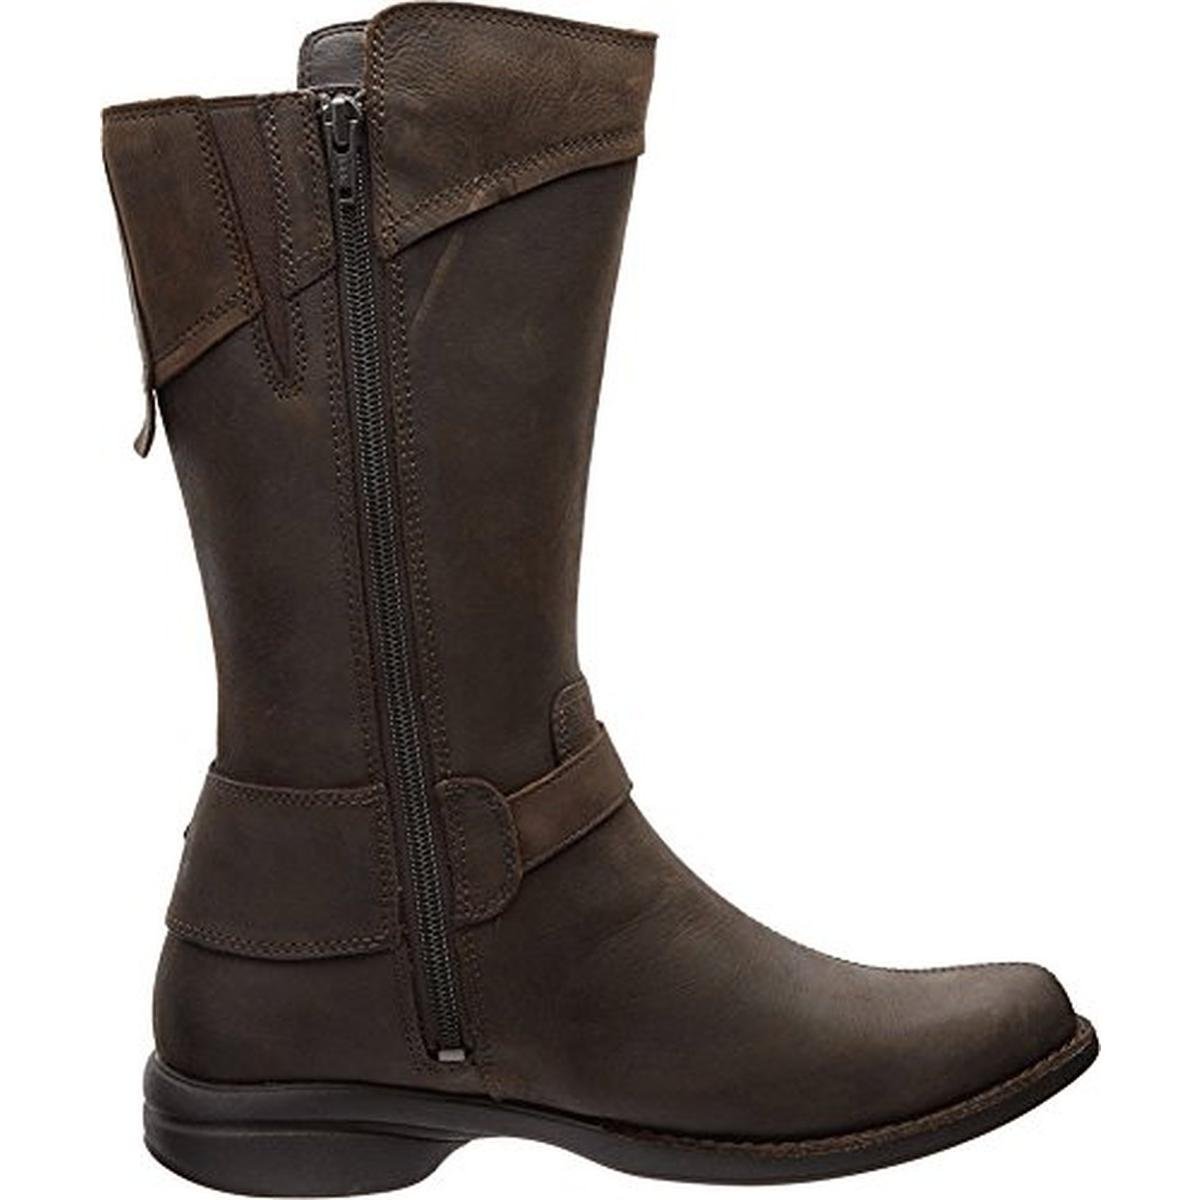 Merrell 7469 Womens Captiva Brown Leather Riding Boots Shoes 6 Medium ...